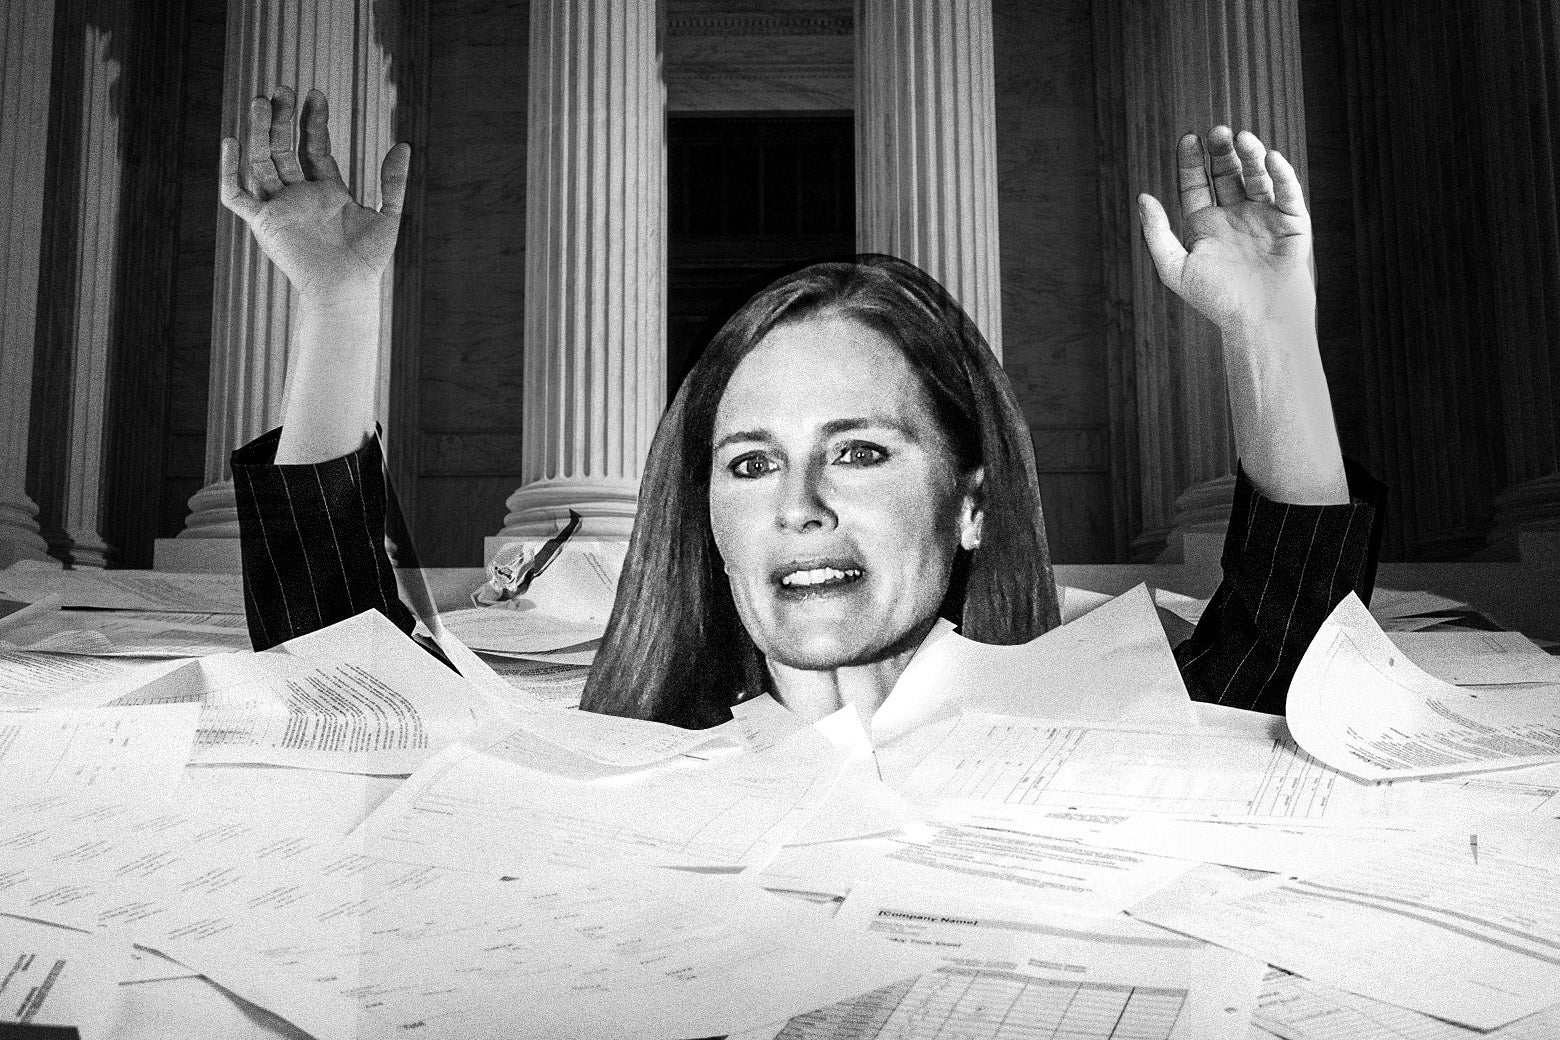 Amy Coney Barrett drowning in a sea of documents.